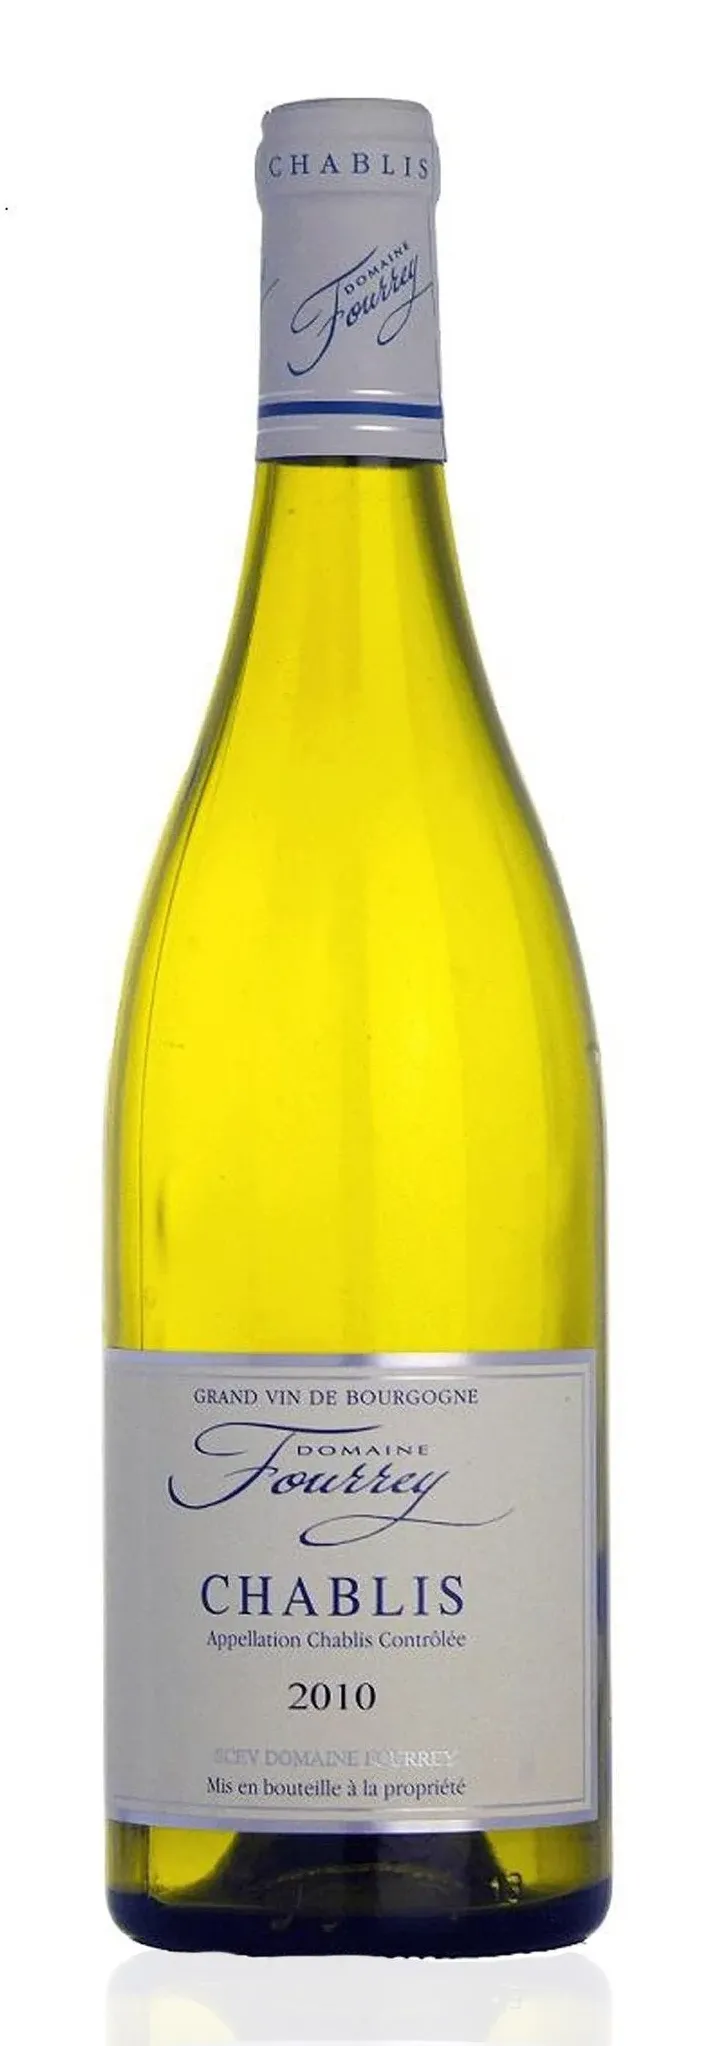 Bottle of Domaine Fourrey Chabliswith label visible